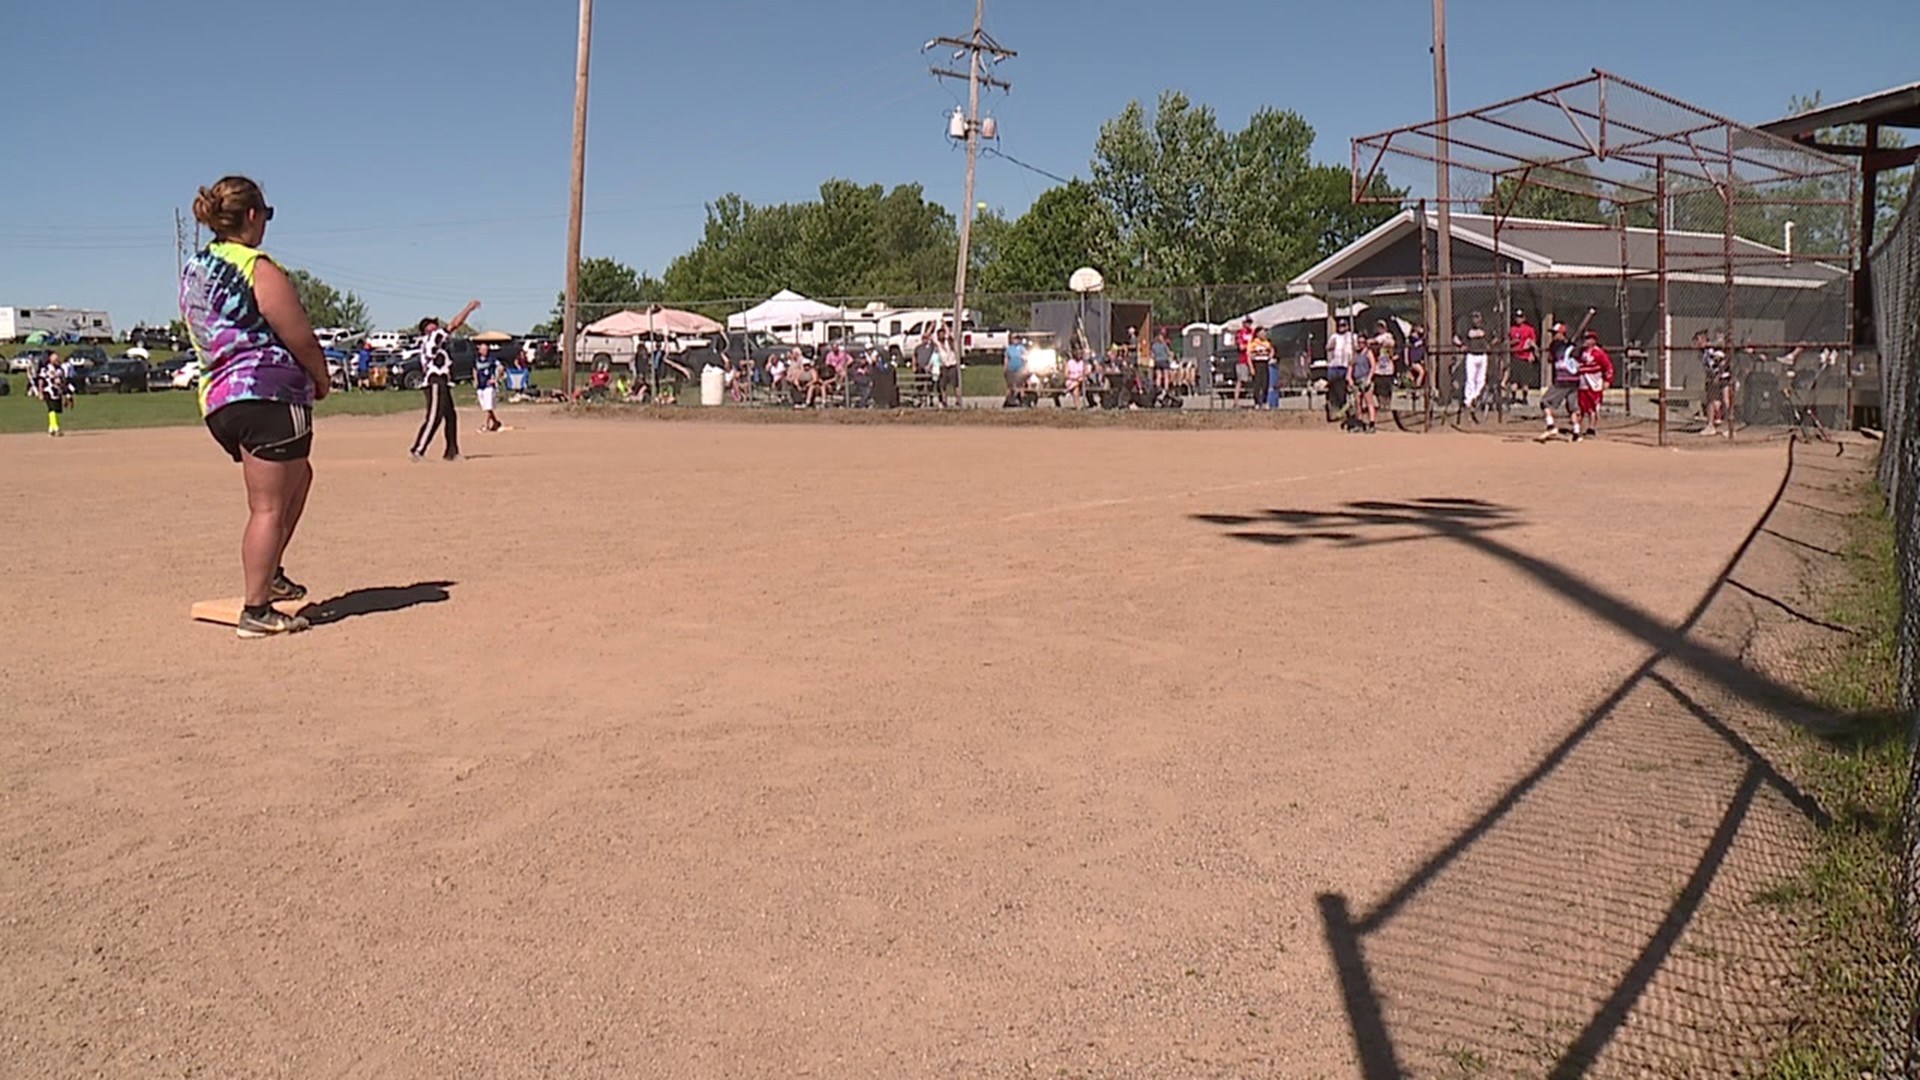 The second annual Julian Dean Williams Memorial softball tournament is taking place in Susquehanna County.